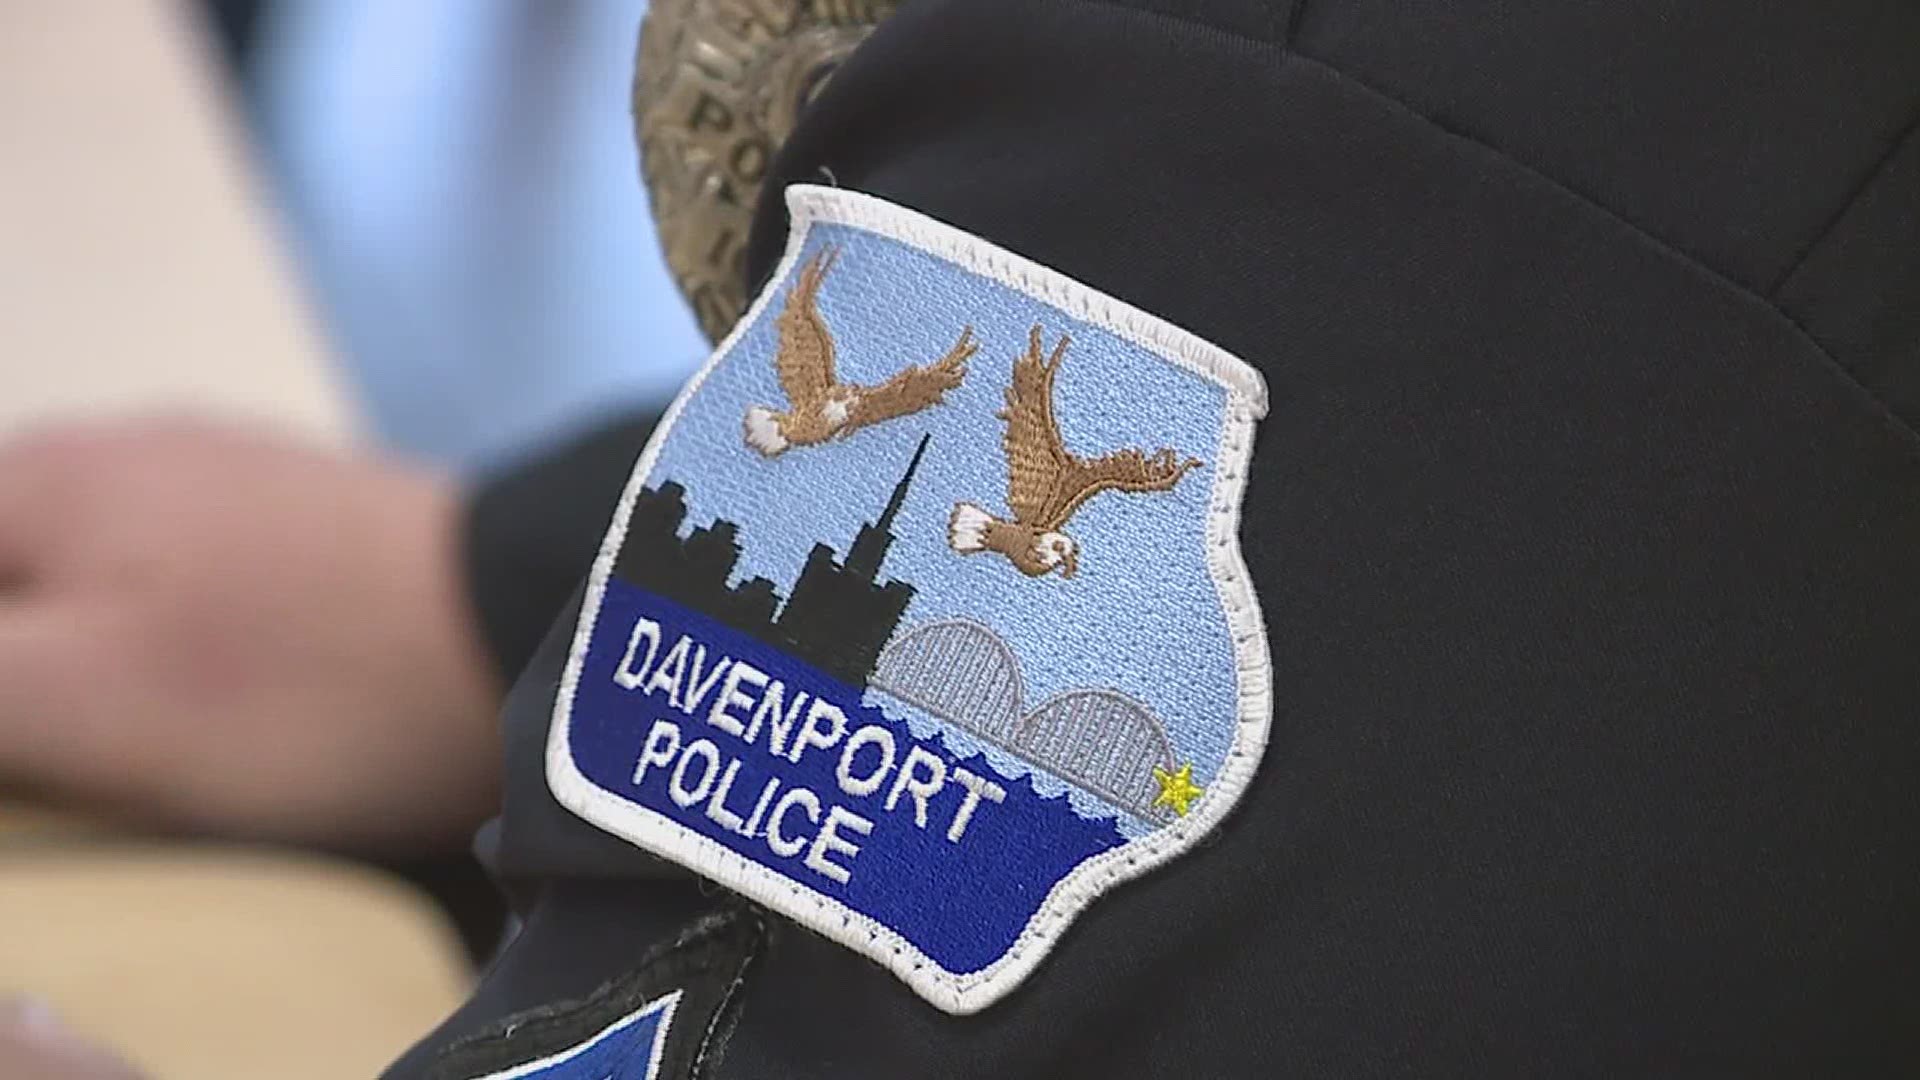 "Coffee with a Cop" will be held at Hy-Vee's across Davenport for the next few months in an effort to build relationships between the public and the department.